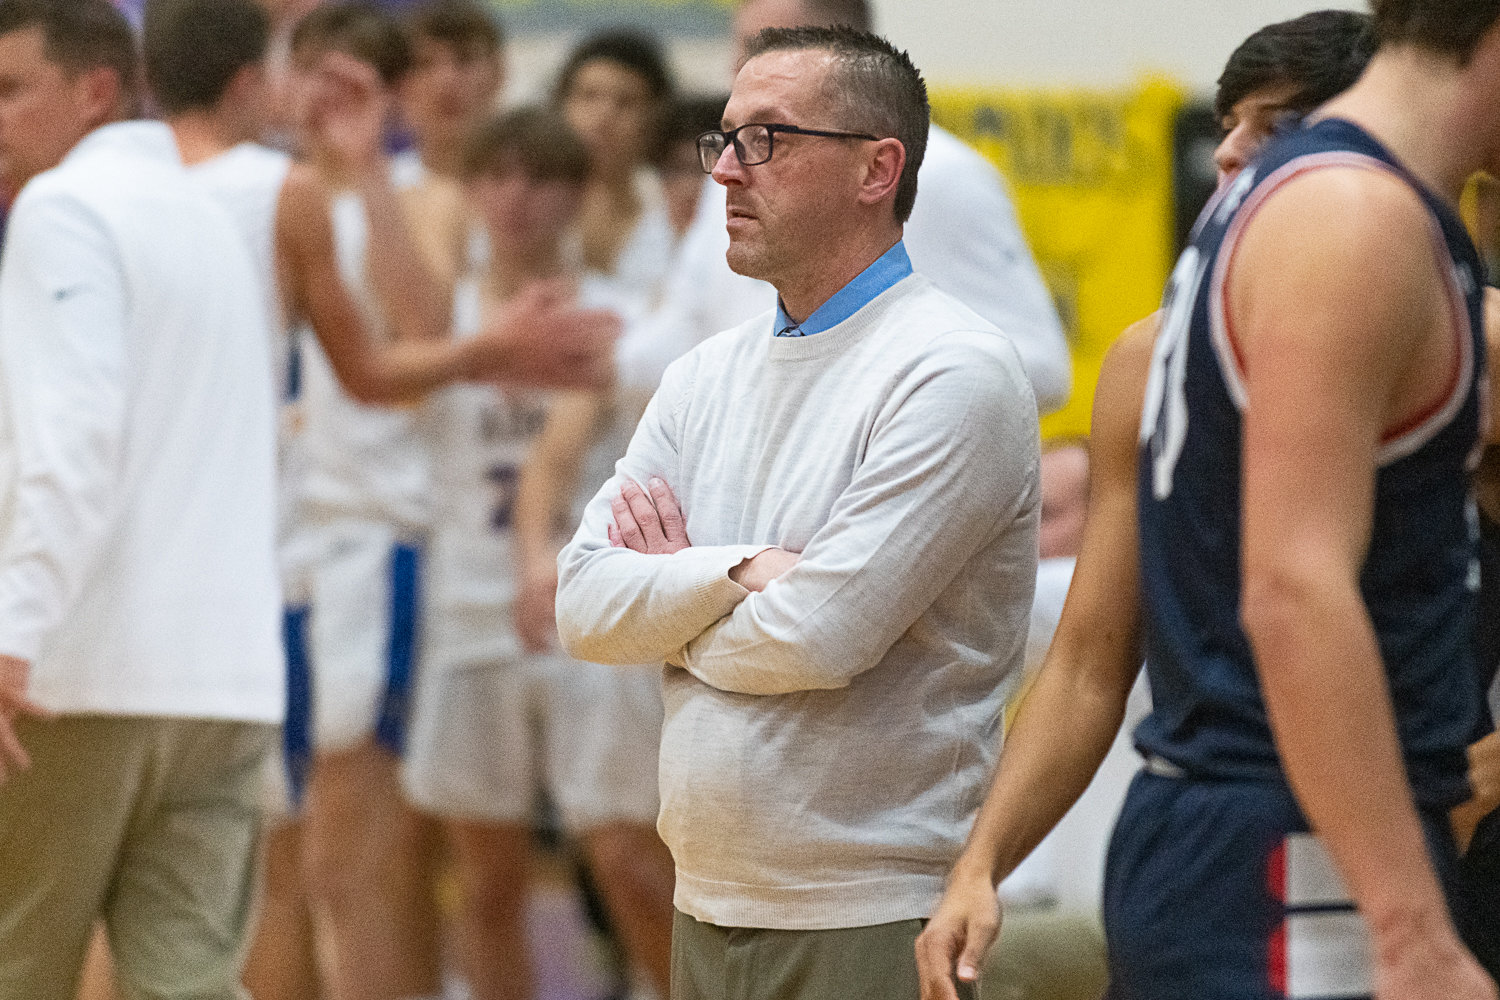 Black Hills head coach Jeff Gallagher takes in the action during the Wolves' 67-60 loss at Adna on Nov. 29.